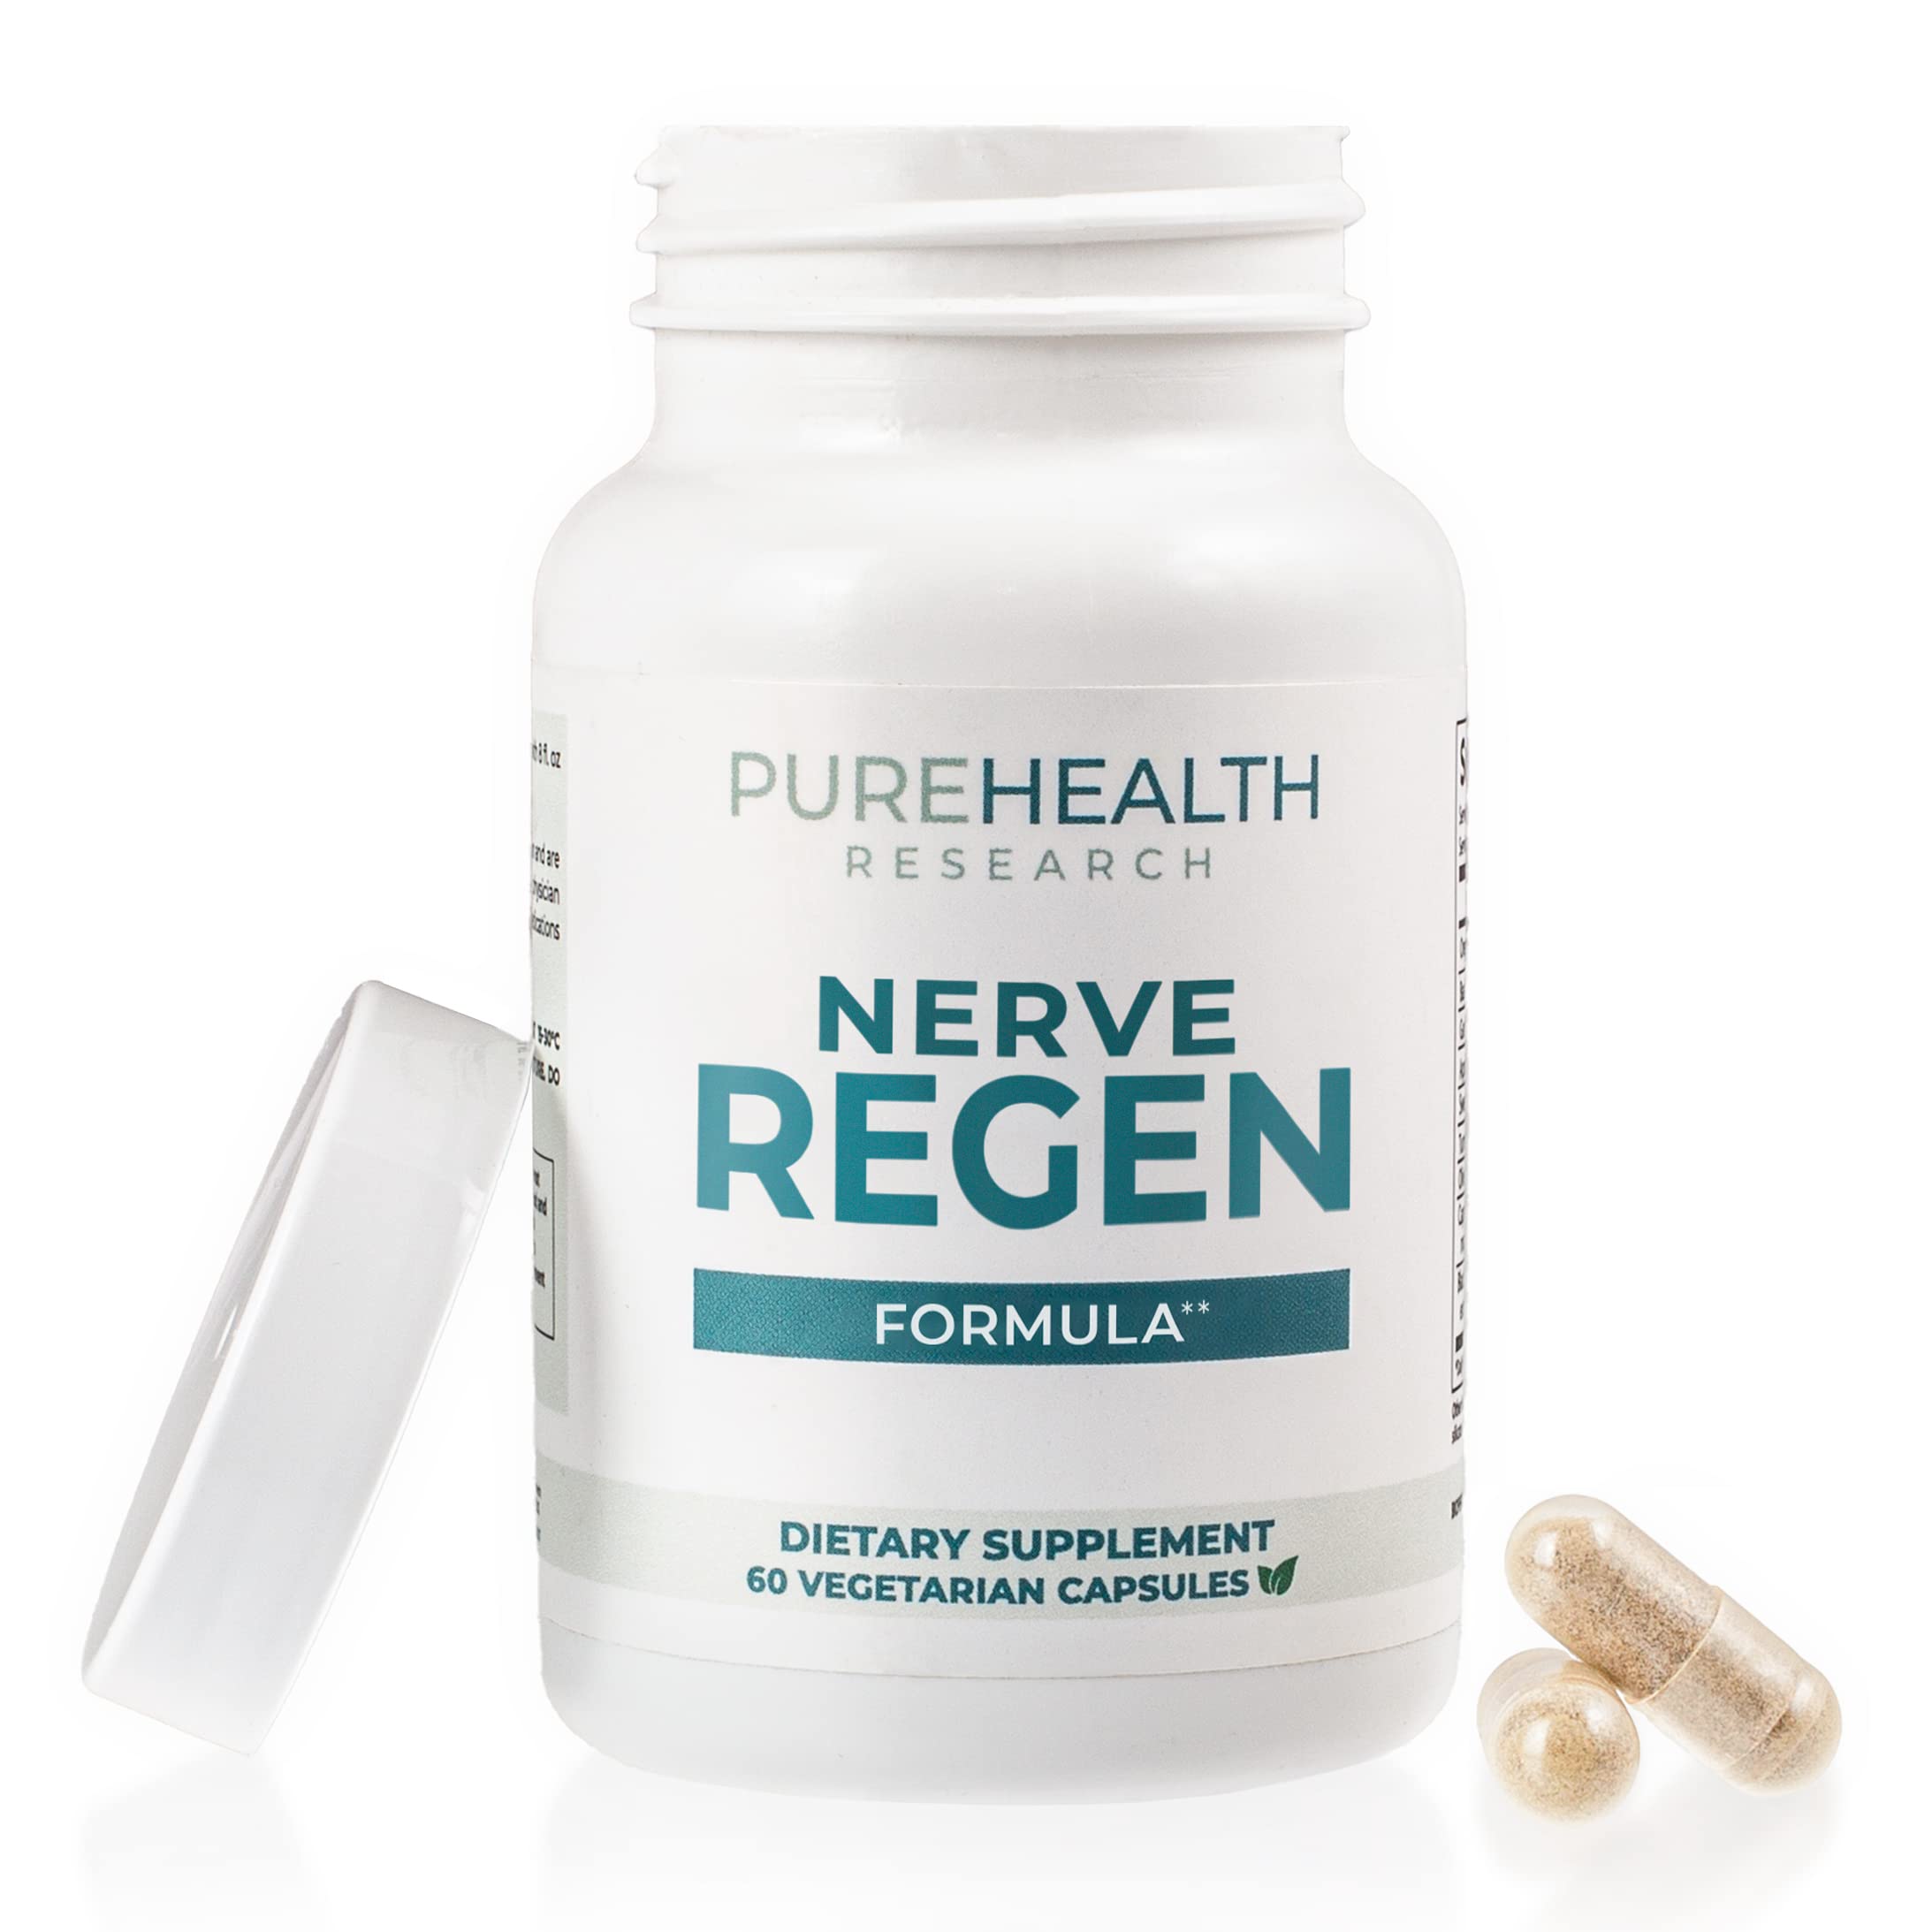 Are you experiencing nerve pain. Try this all-natural nerve support formula